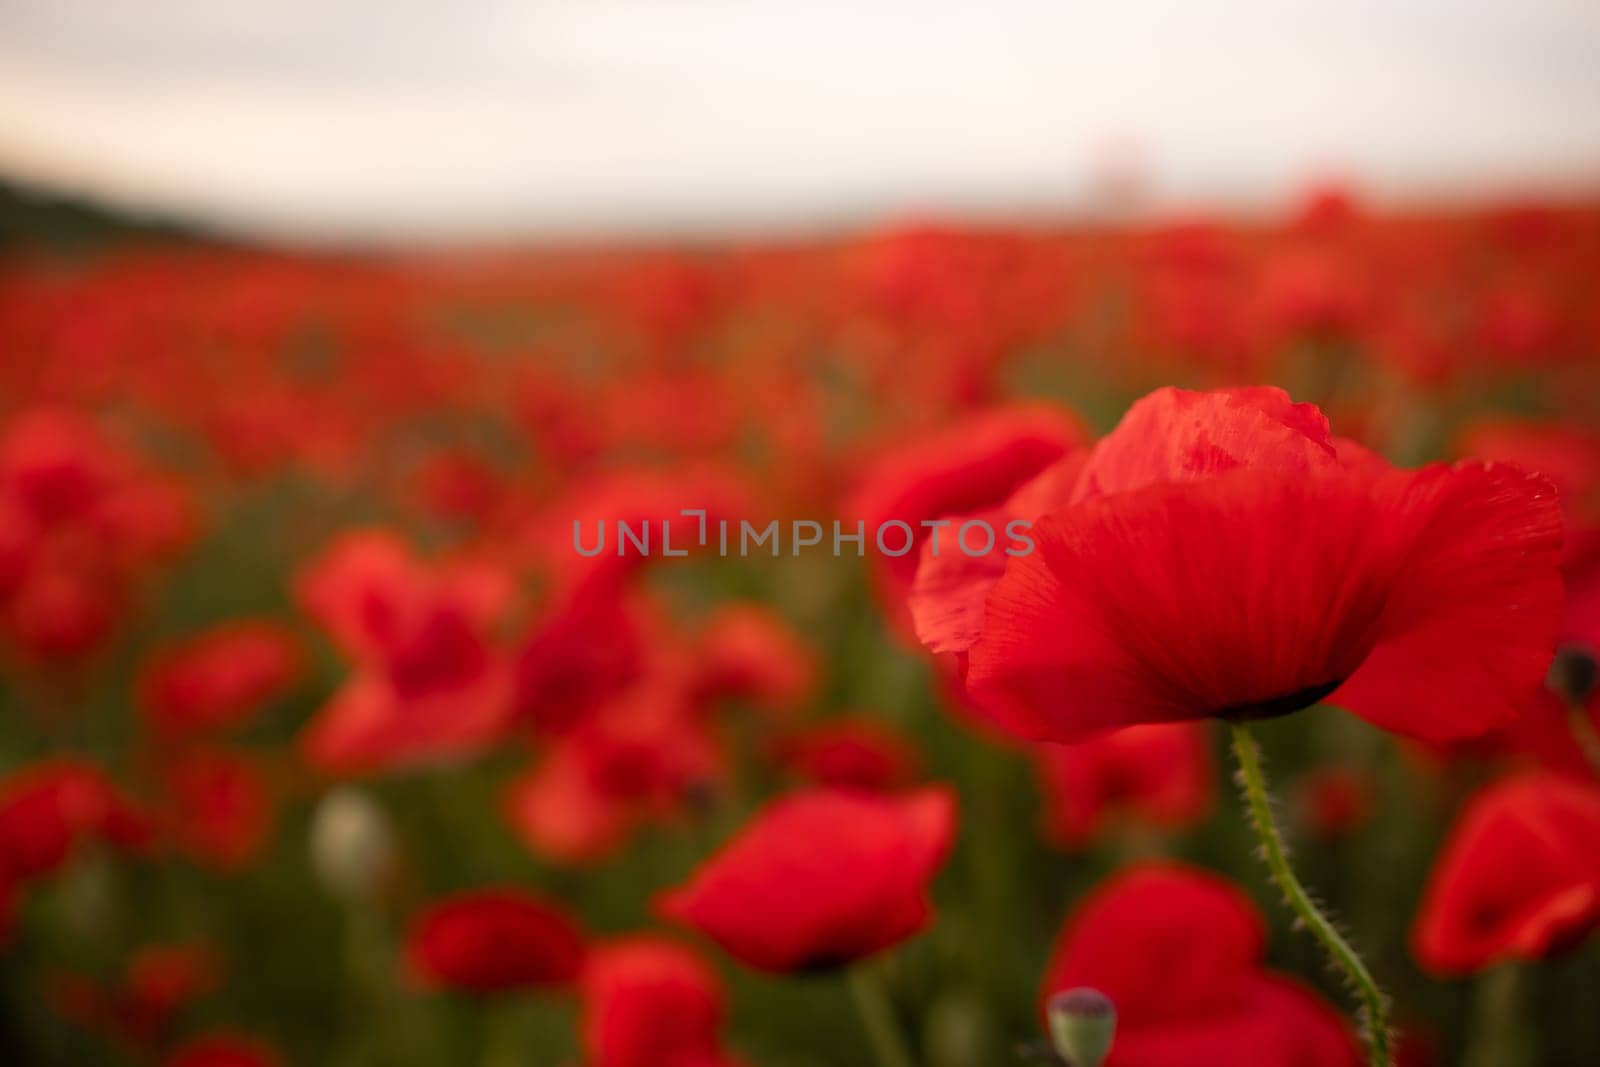 A field of red poppies with a single red flower in the foreground